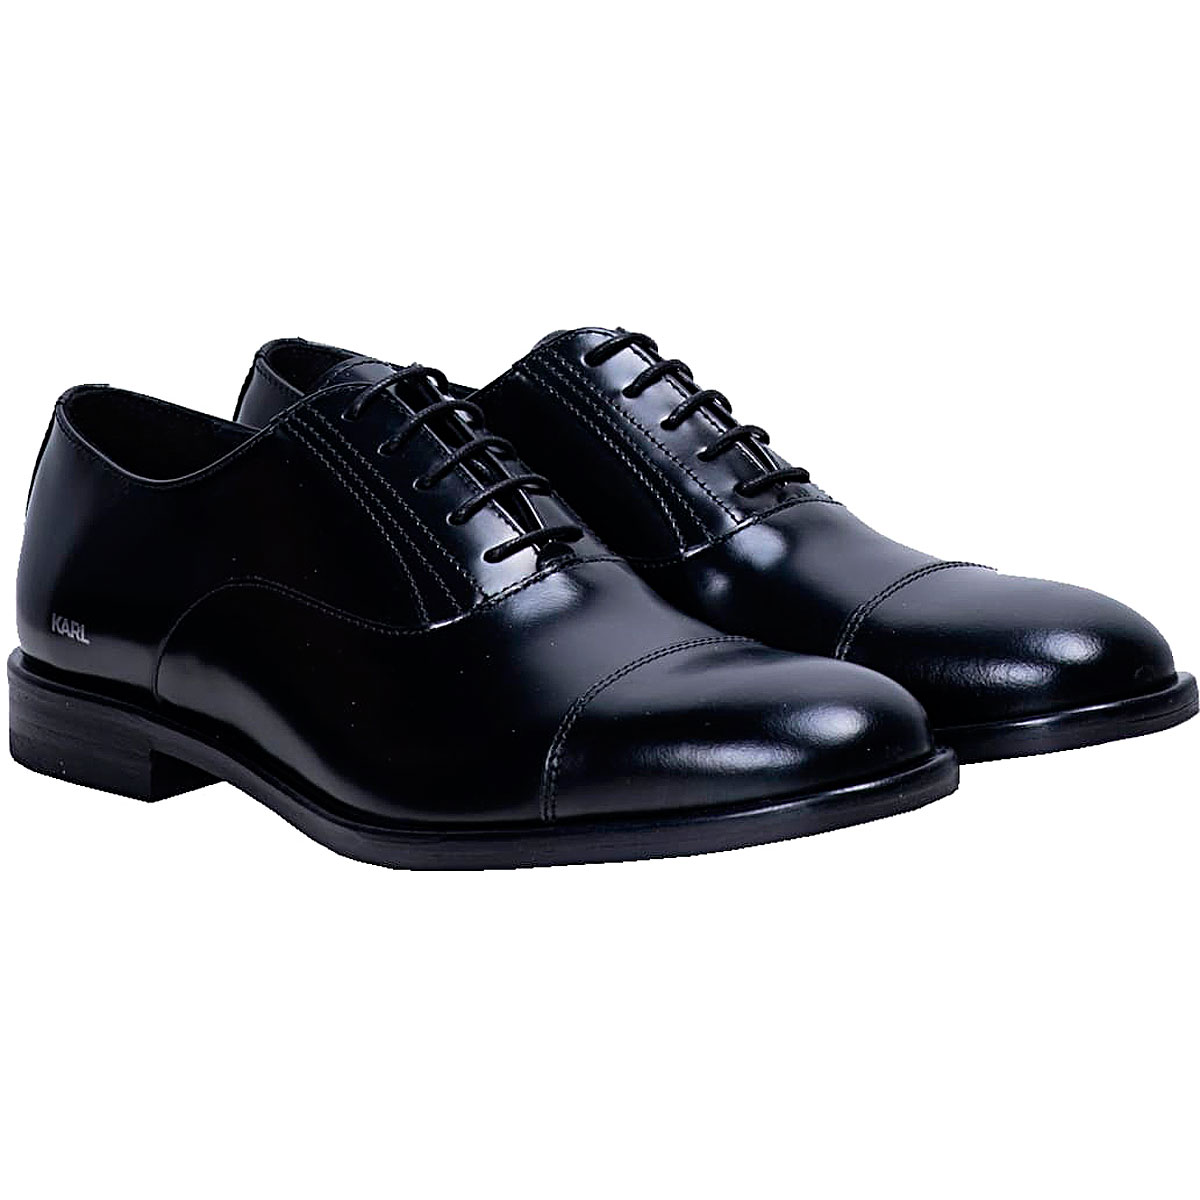 Mens Shoes Karl Lagerfeld, Style code: kl12026-nero-